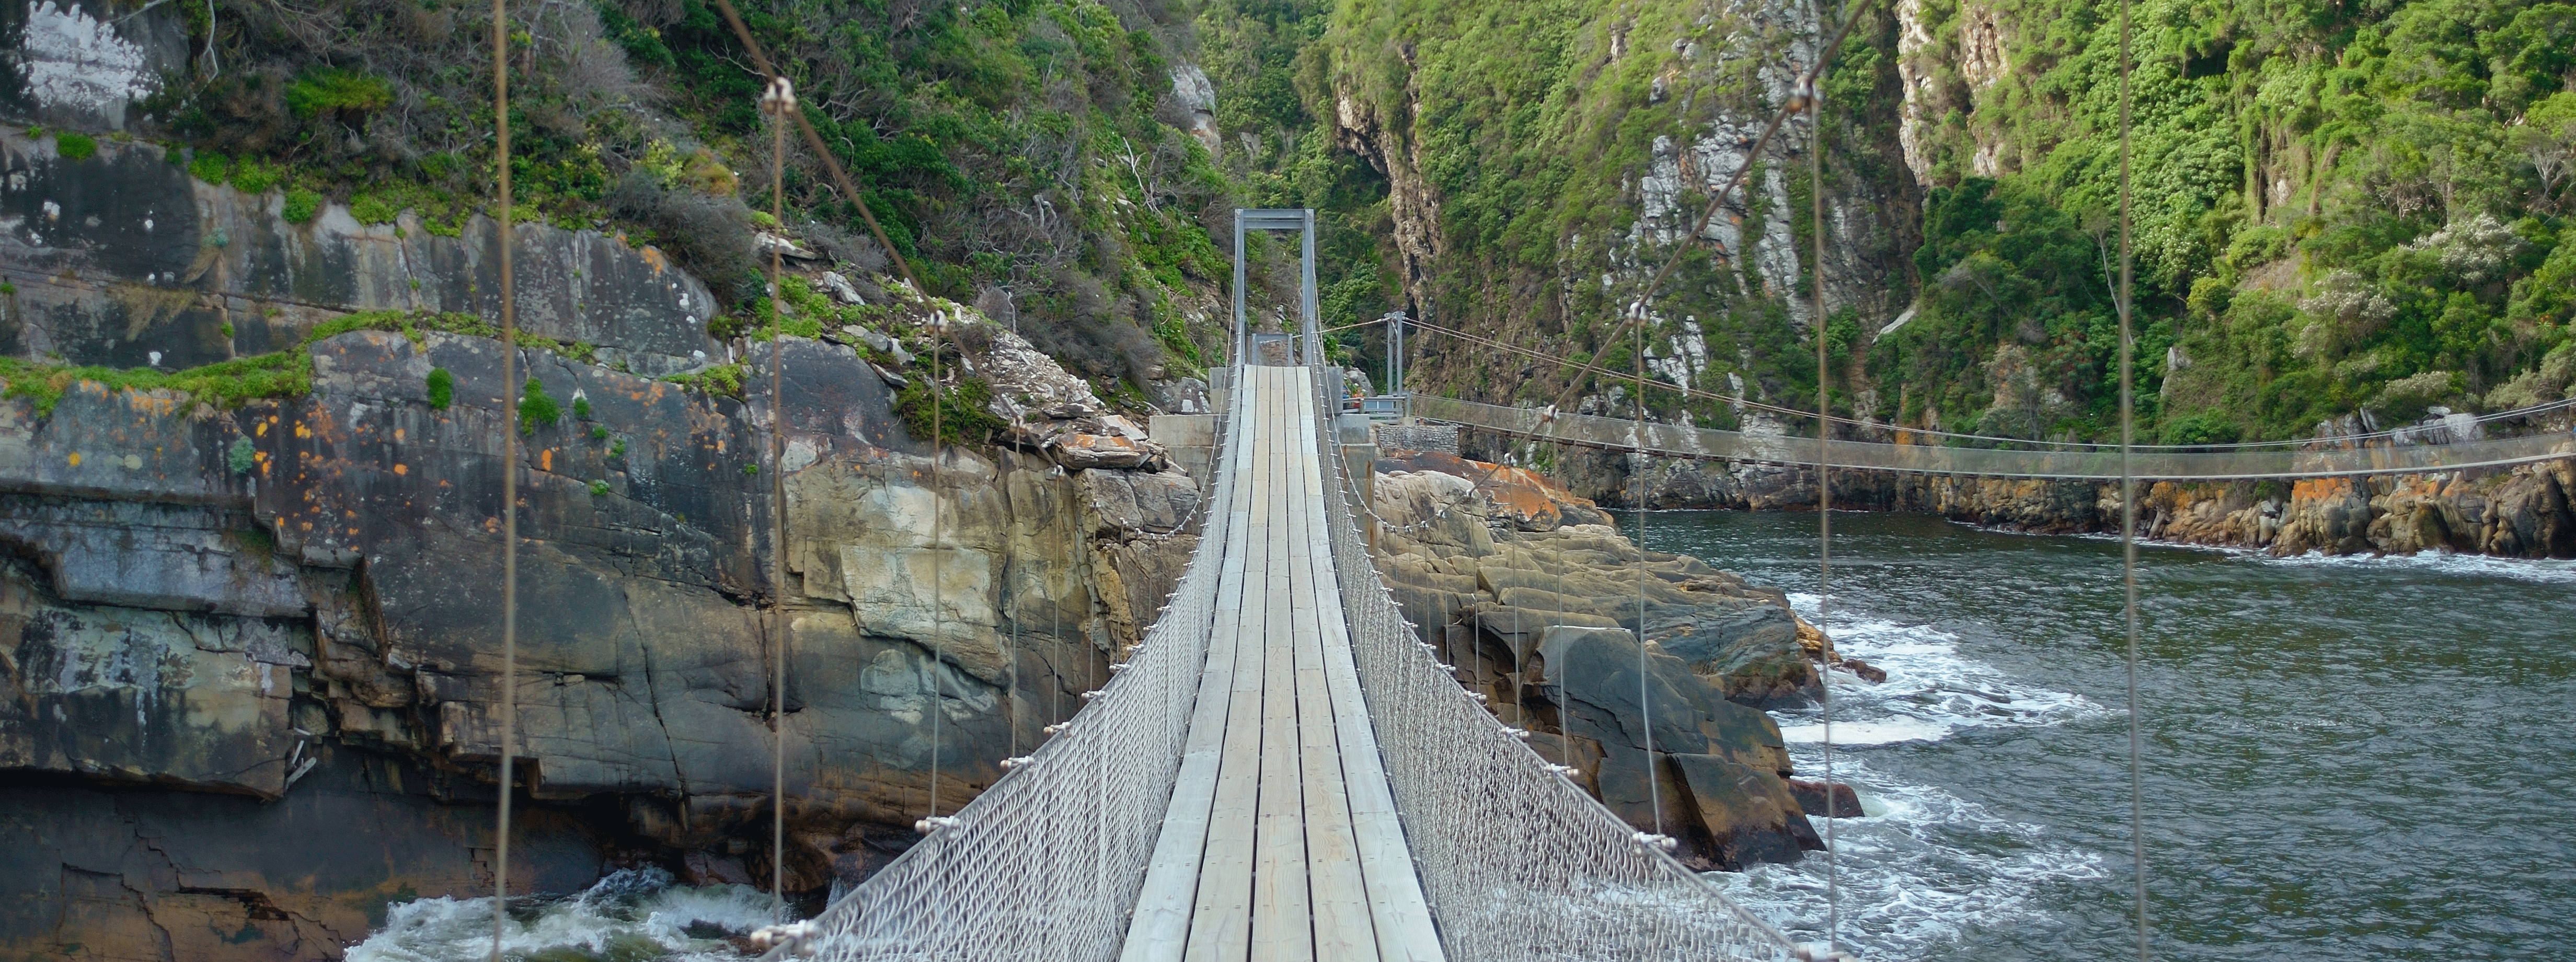 /resource/Images/southafrica/headerimage/Bridge-in-Tsitsikamma-national-park-Garden-route-South-Africa.png